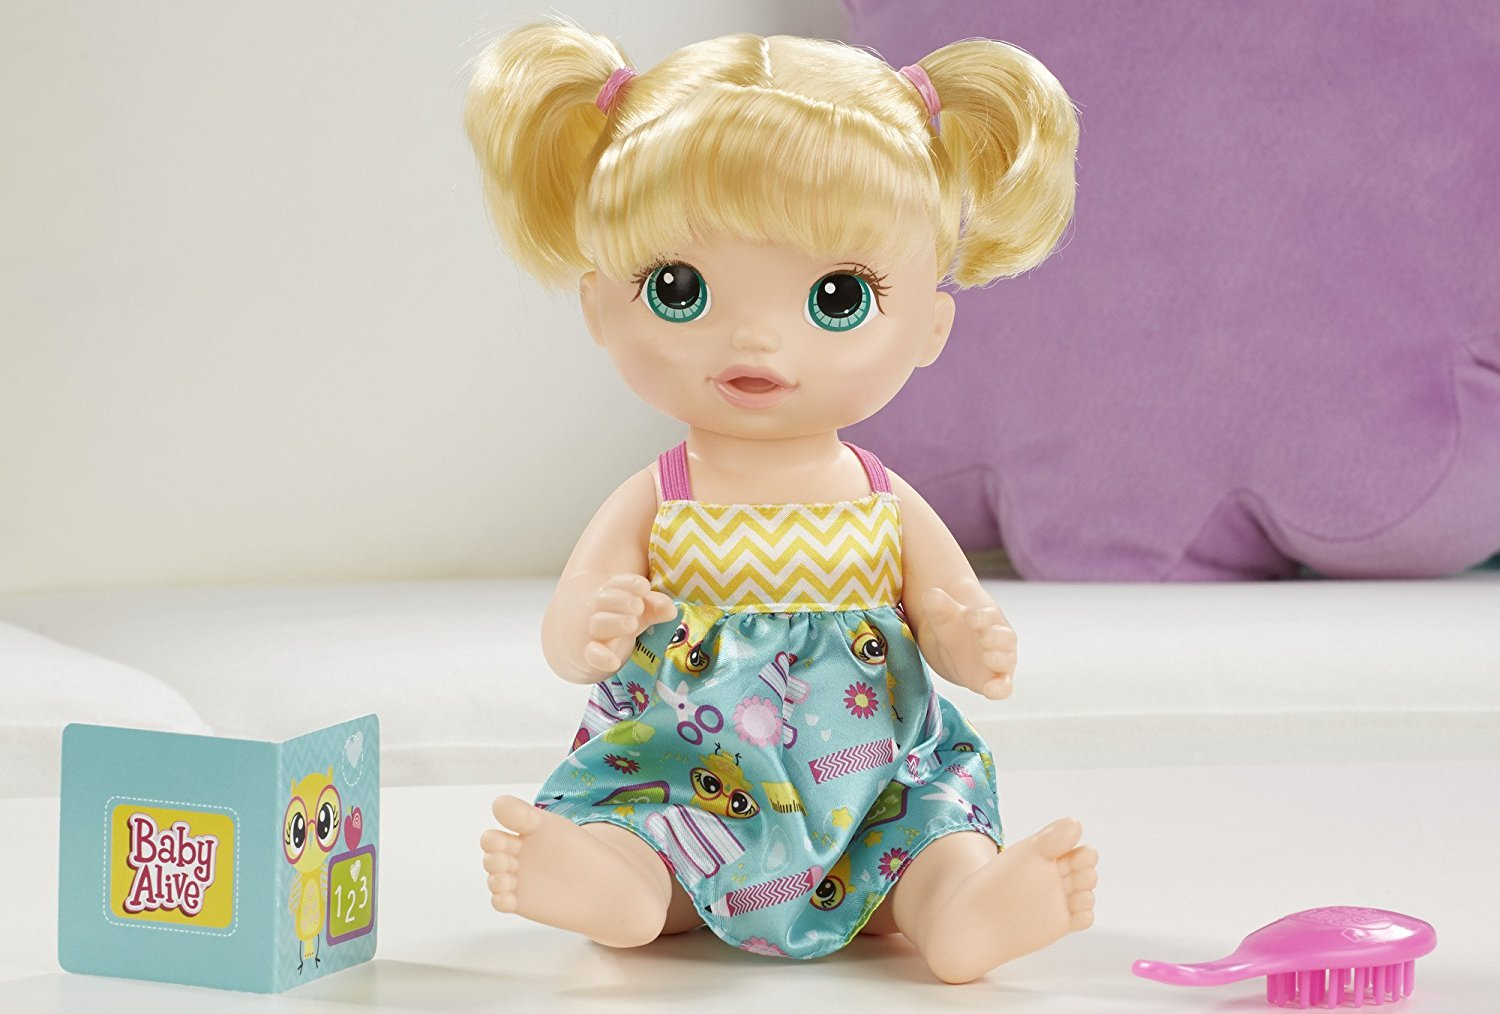 Amazon Prime Day: Baby Alive Ready for School Baby Only $11.90!